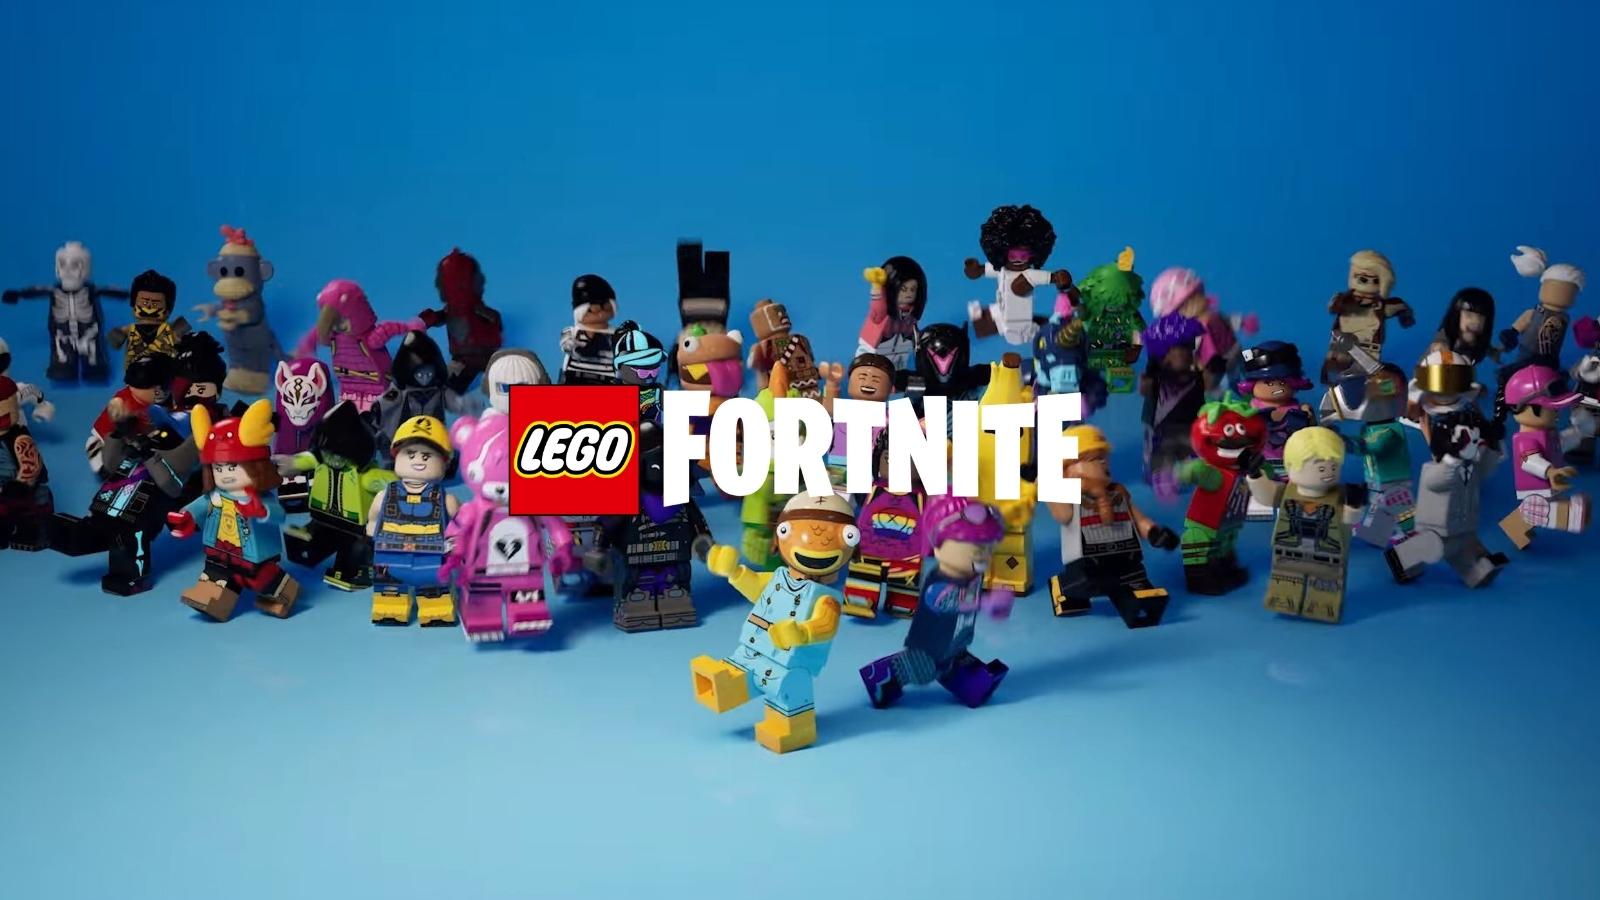 Is LEGO Fortnite free to play?